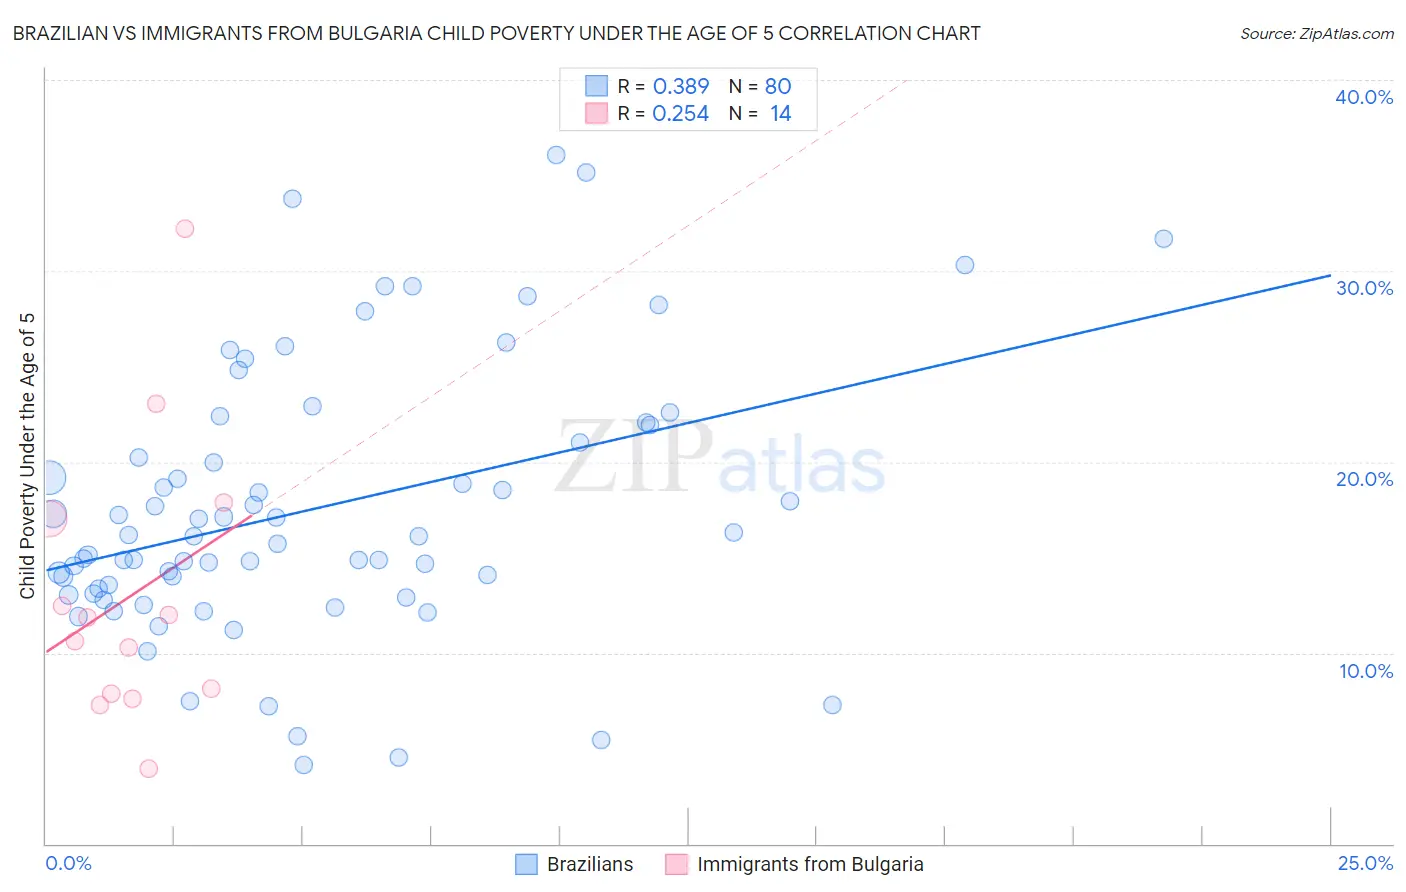 Brazilian vs Immigrants from Bulgaria Child Poverty Under the Age of 5